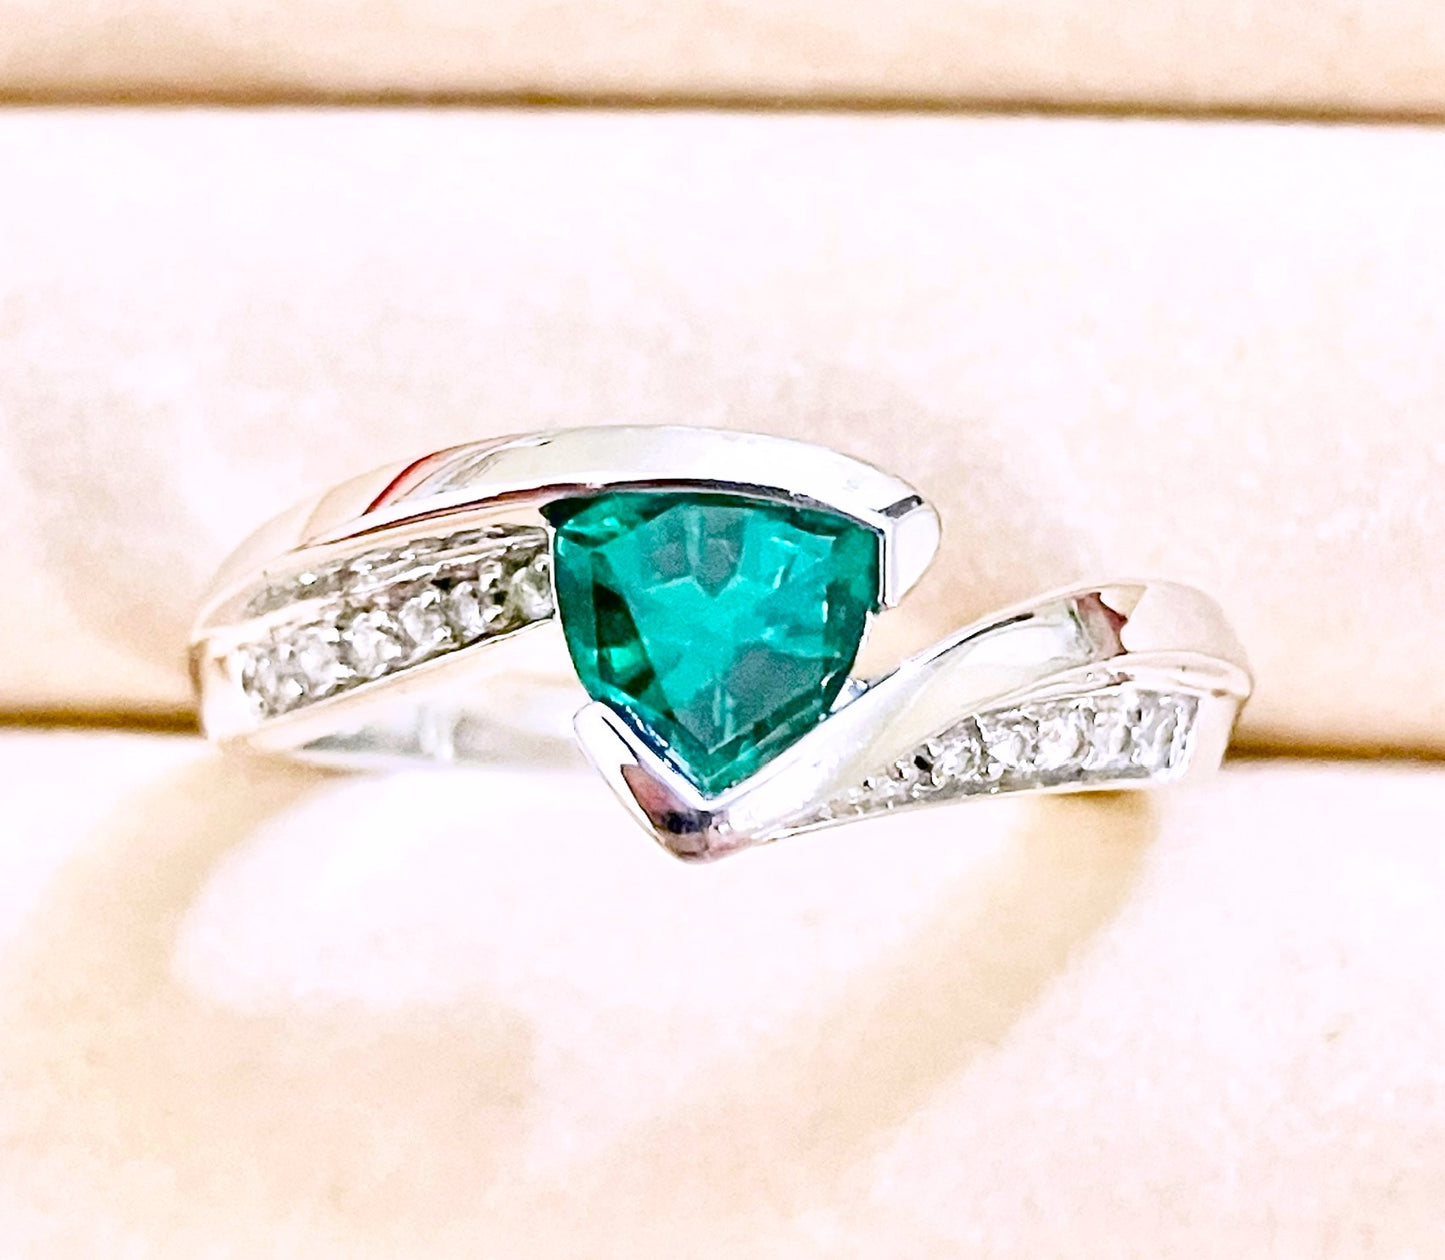 Triangular Brilliant Cut “Emerald” in Curved Bypass Shank with “Diamond” Accents Ring